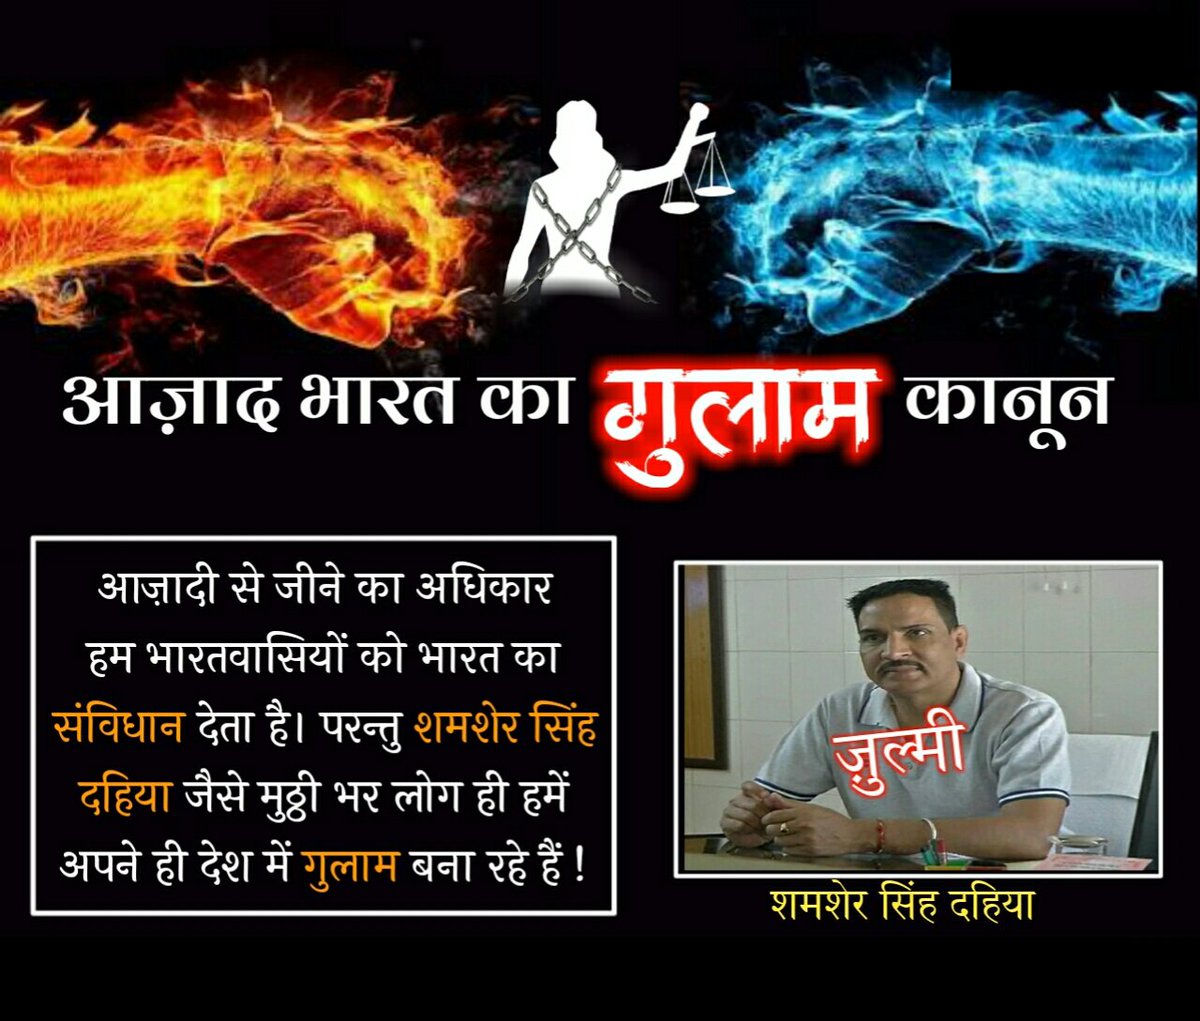 #ज़ुल्मी_जेलर_शमशेरदहिया
Government officers are highly misusing their positions for collecting birbes. Jailer Shamshersingh Dahiya is one of a kind. He has been accused of taking millions of bribes from prisoners every month. Still no action has been taken against him.